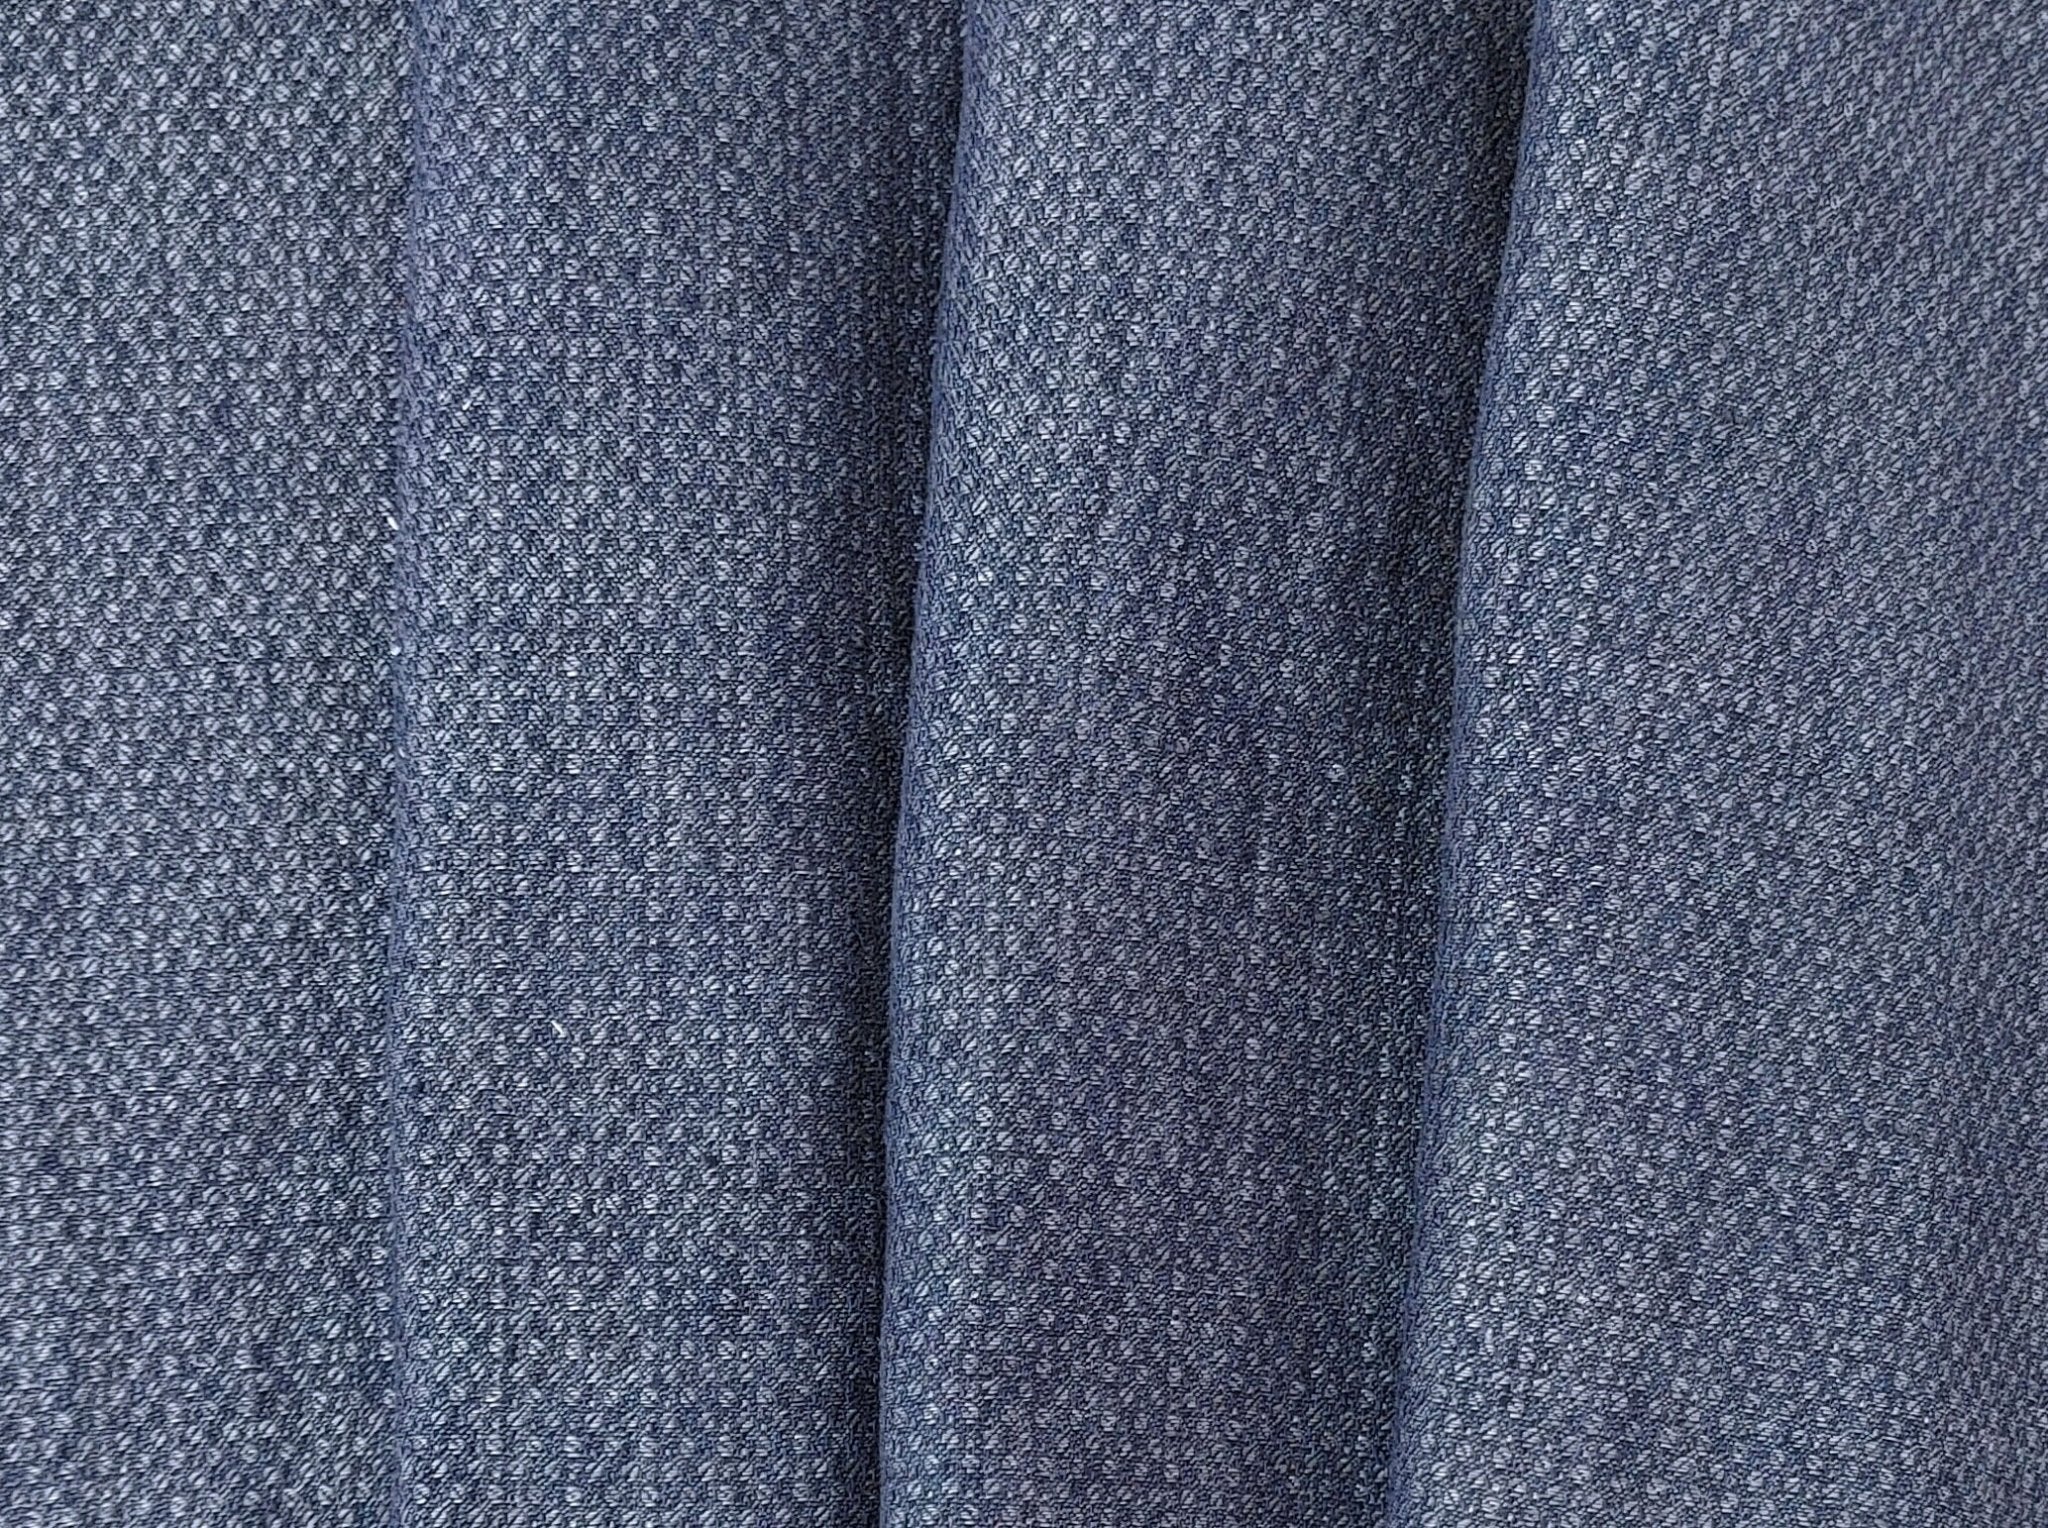 100% Linen Double Face Heavyweight Fabric with Coffee Bean Shape 3996 - The Linen Lab - Navy